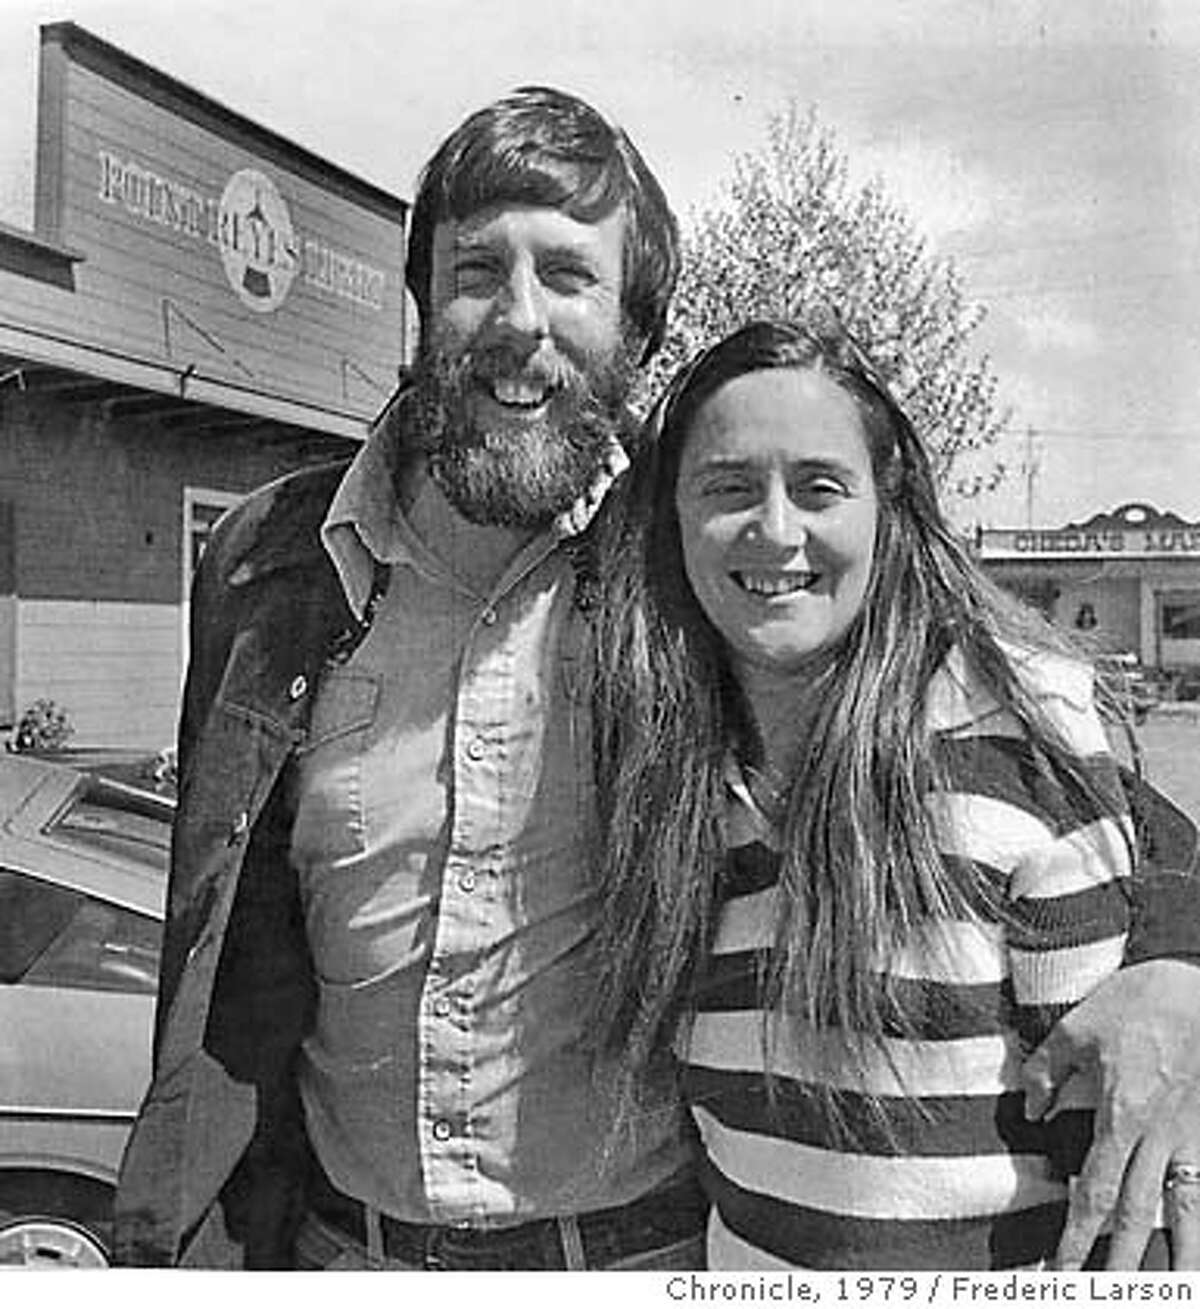 DAVID AND CATHERINE MITCHELL OF THE POINT REYES LIGHT PHOTO BY FRED LARSON, UPI, 1979